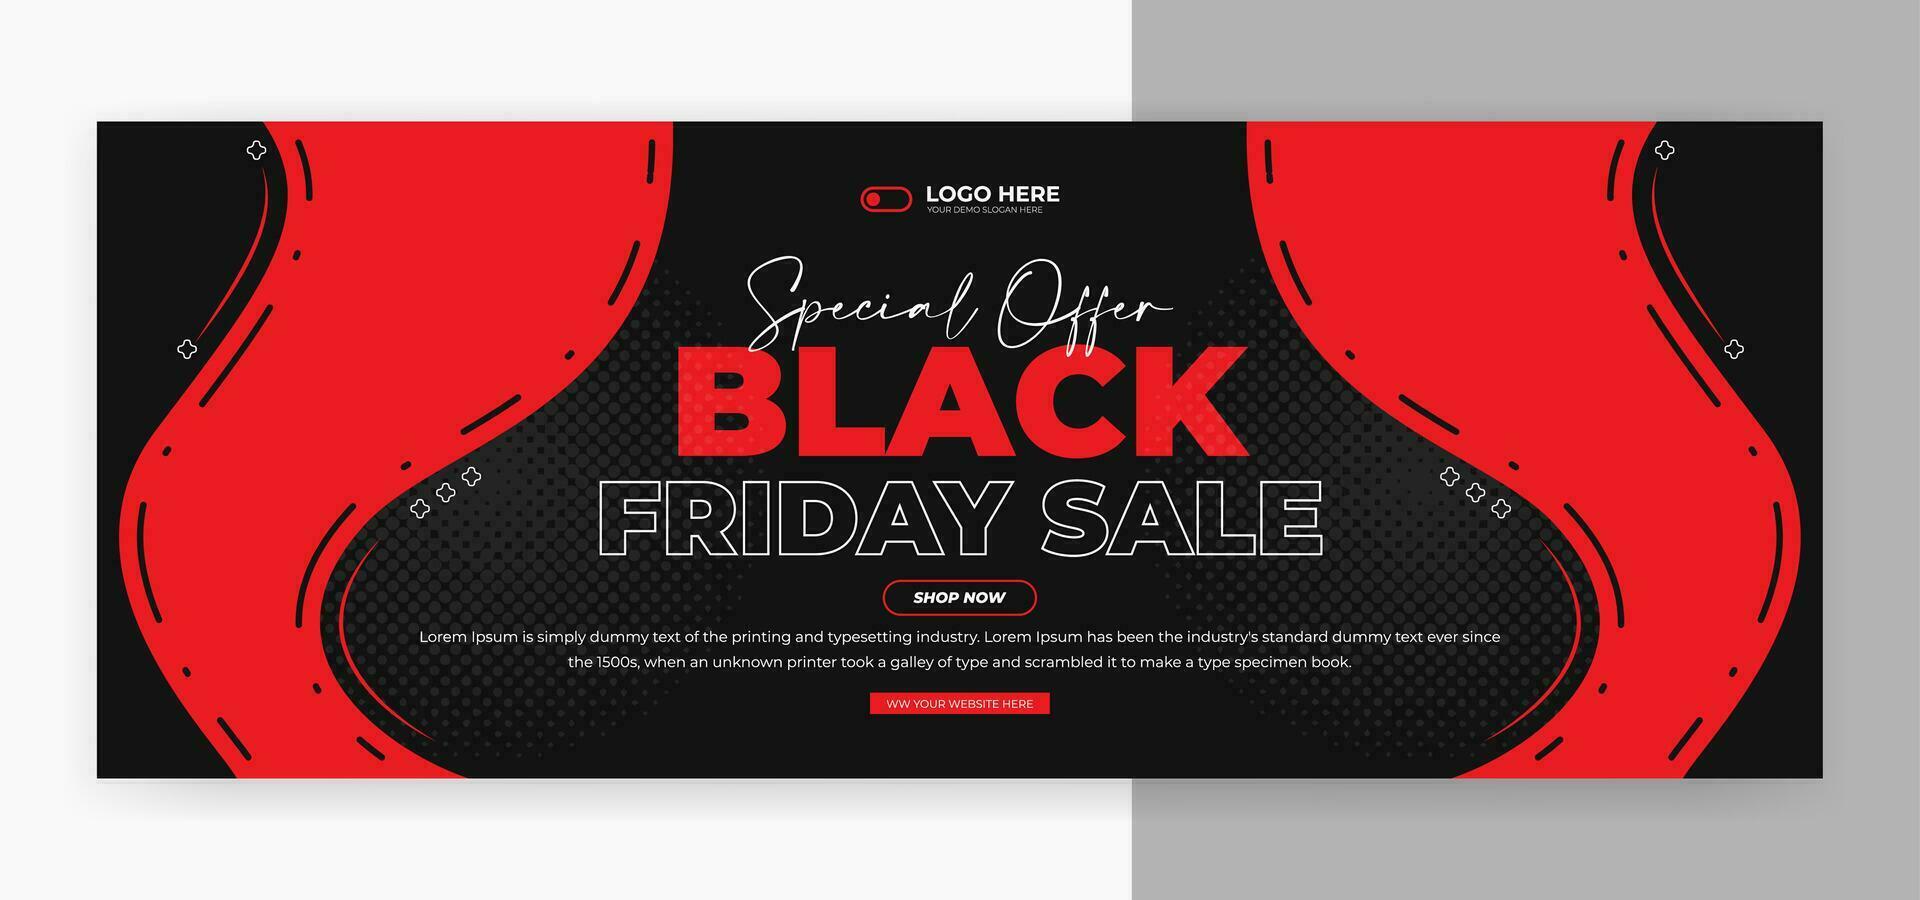 Black Friday Sale cover banner template design vector